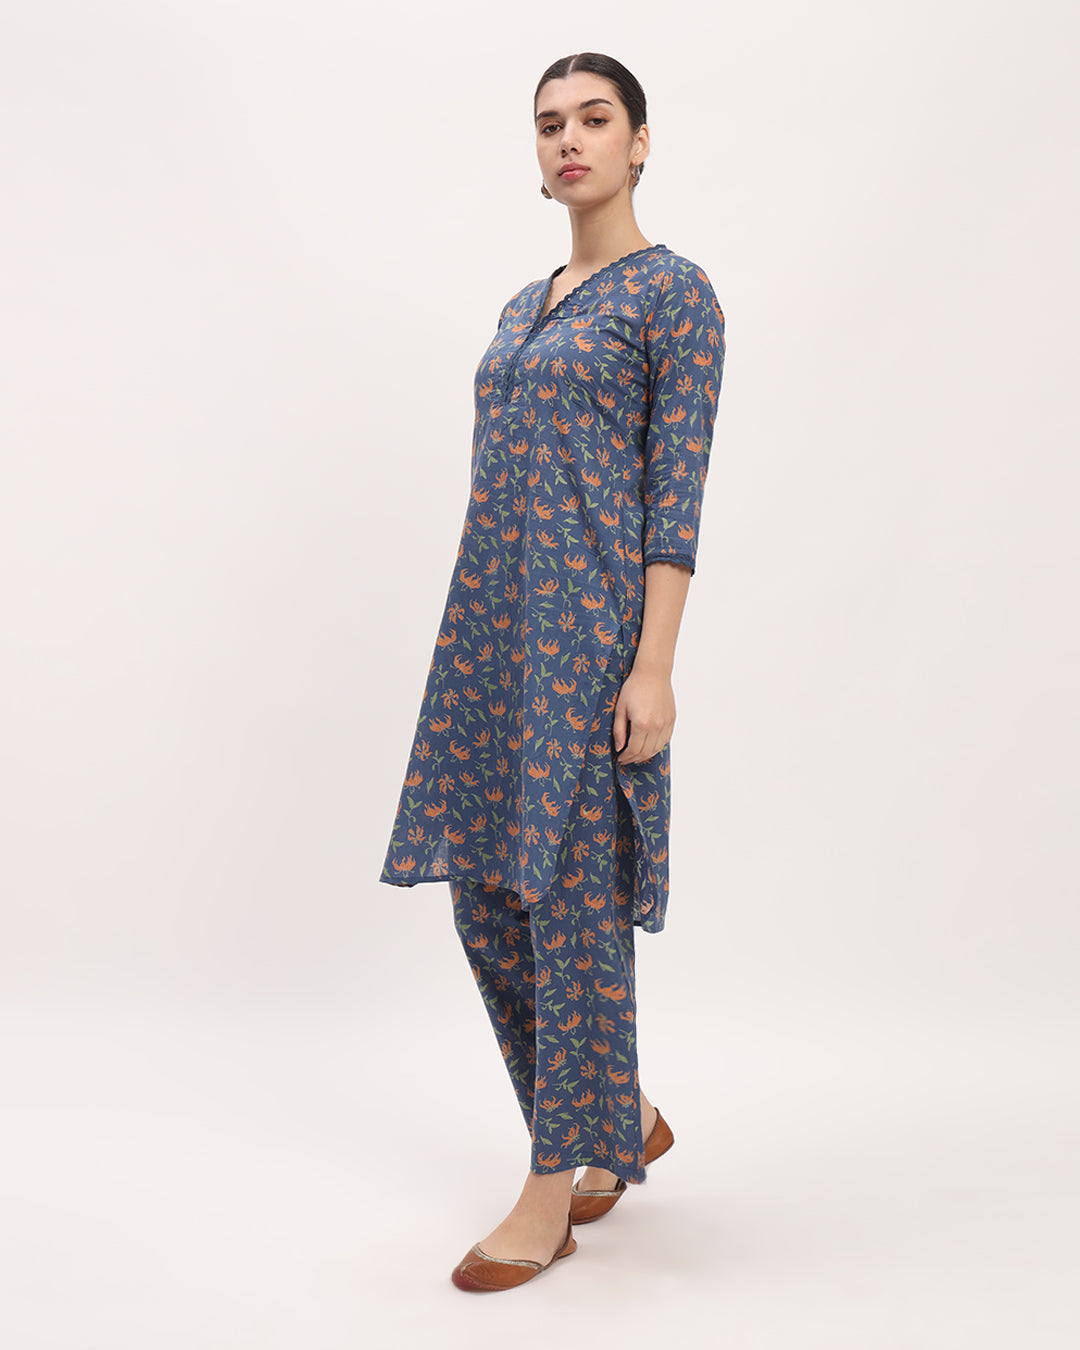 Fire Lillies Elegance Lace Affair Printed Kurta (Without Bottoms)